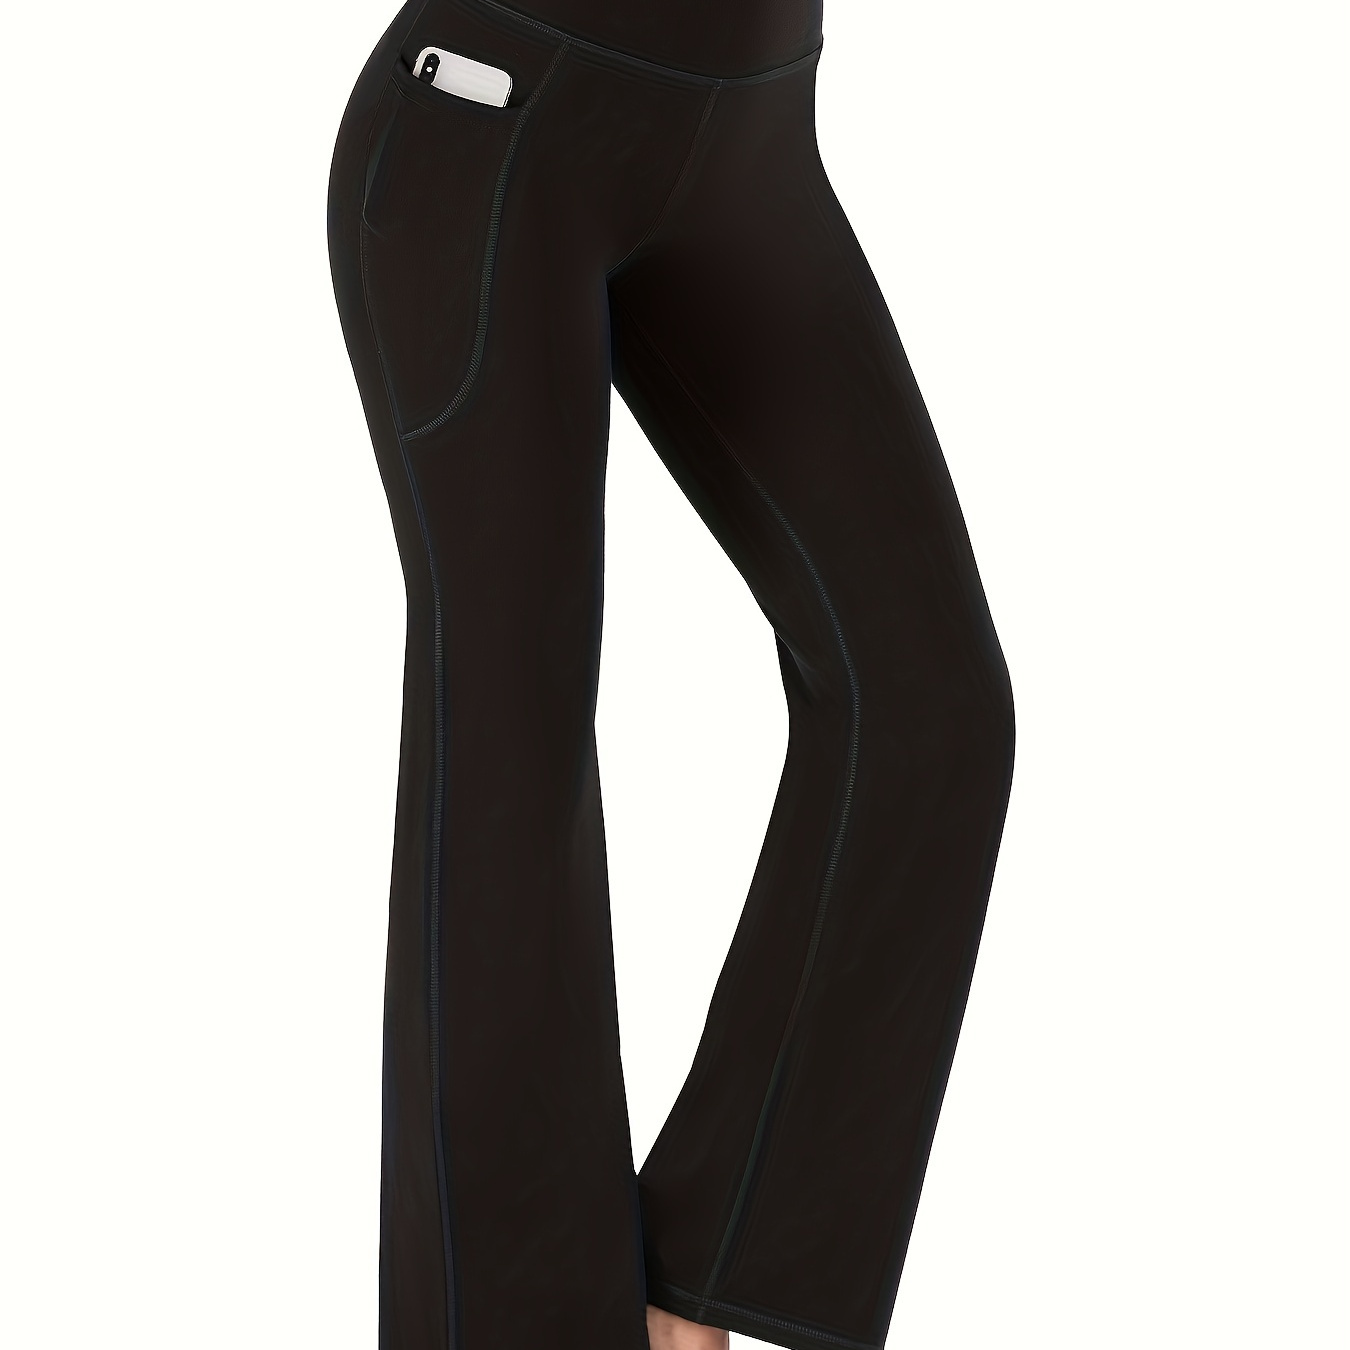 Aayomet Yoga Pants For Women With Pockets Women's Bootcut Yoga